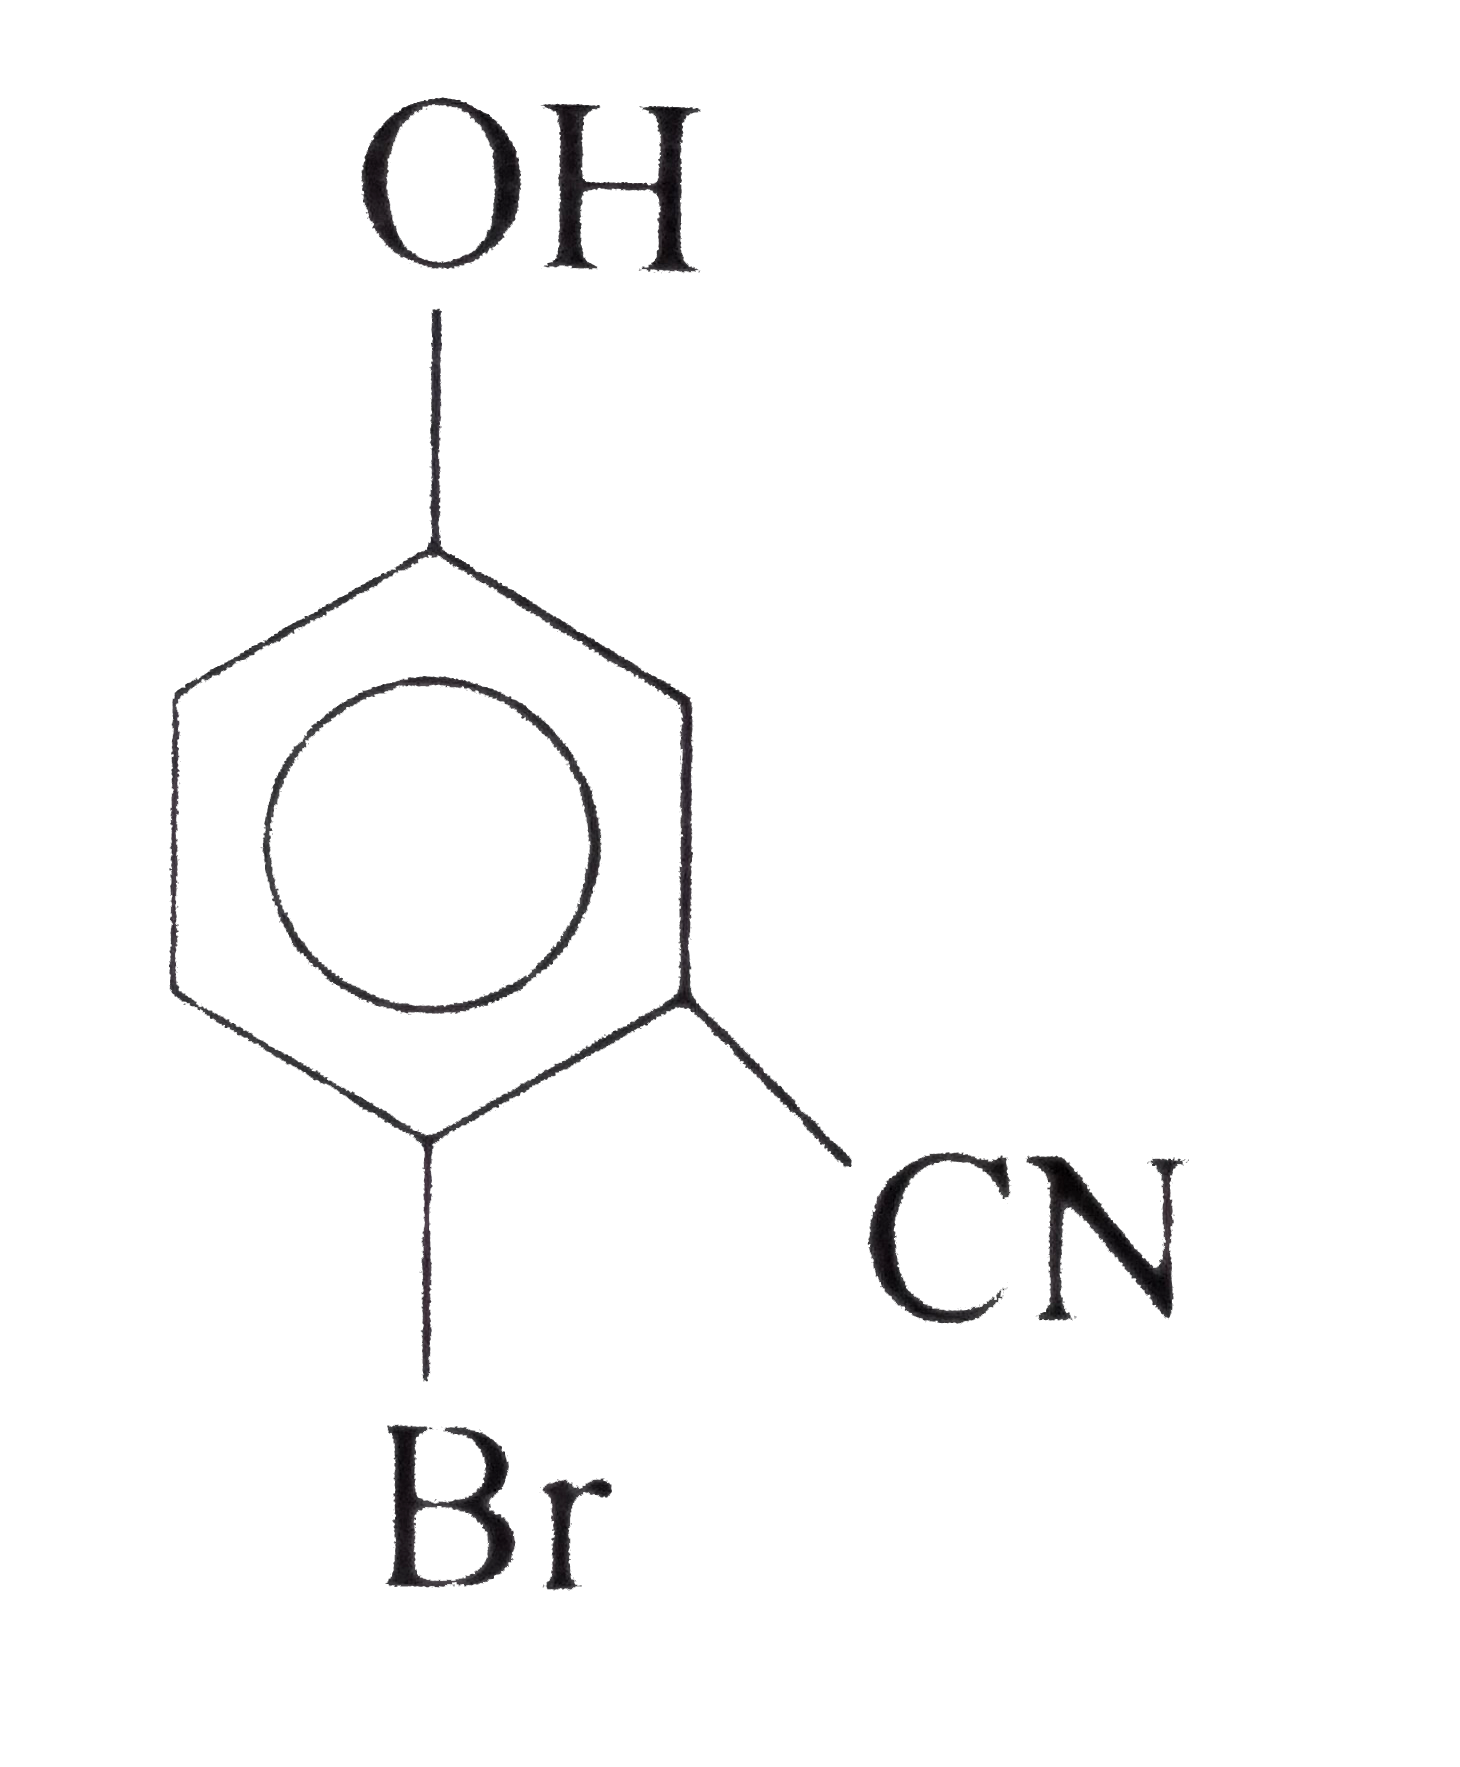 The IUPAC name of the compound      is